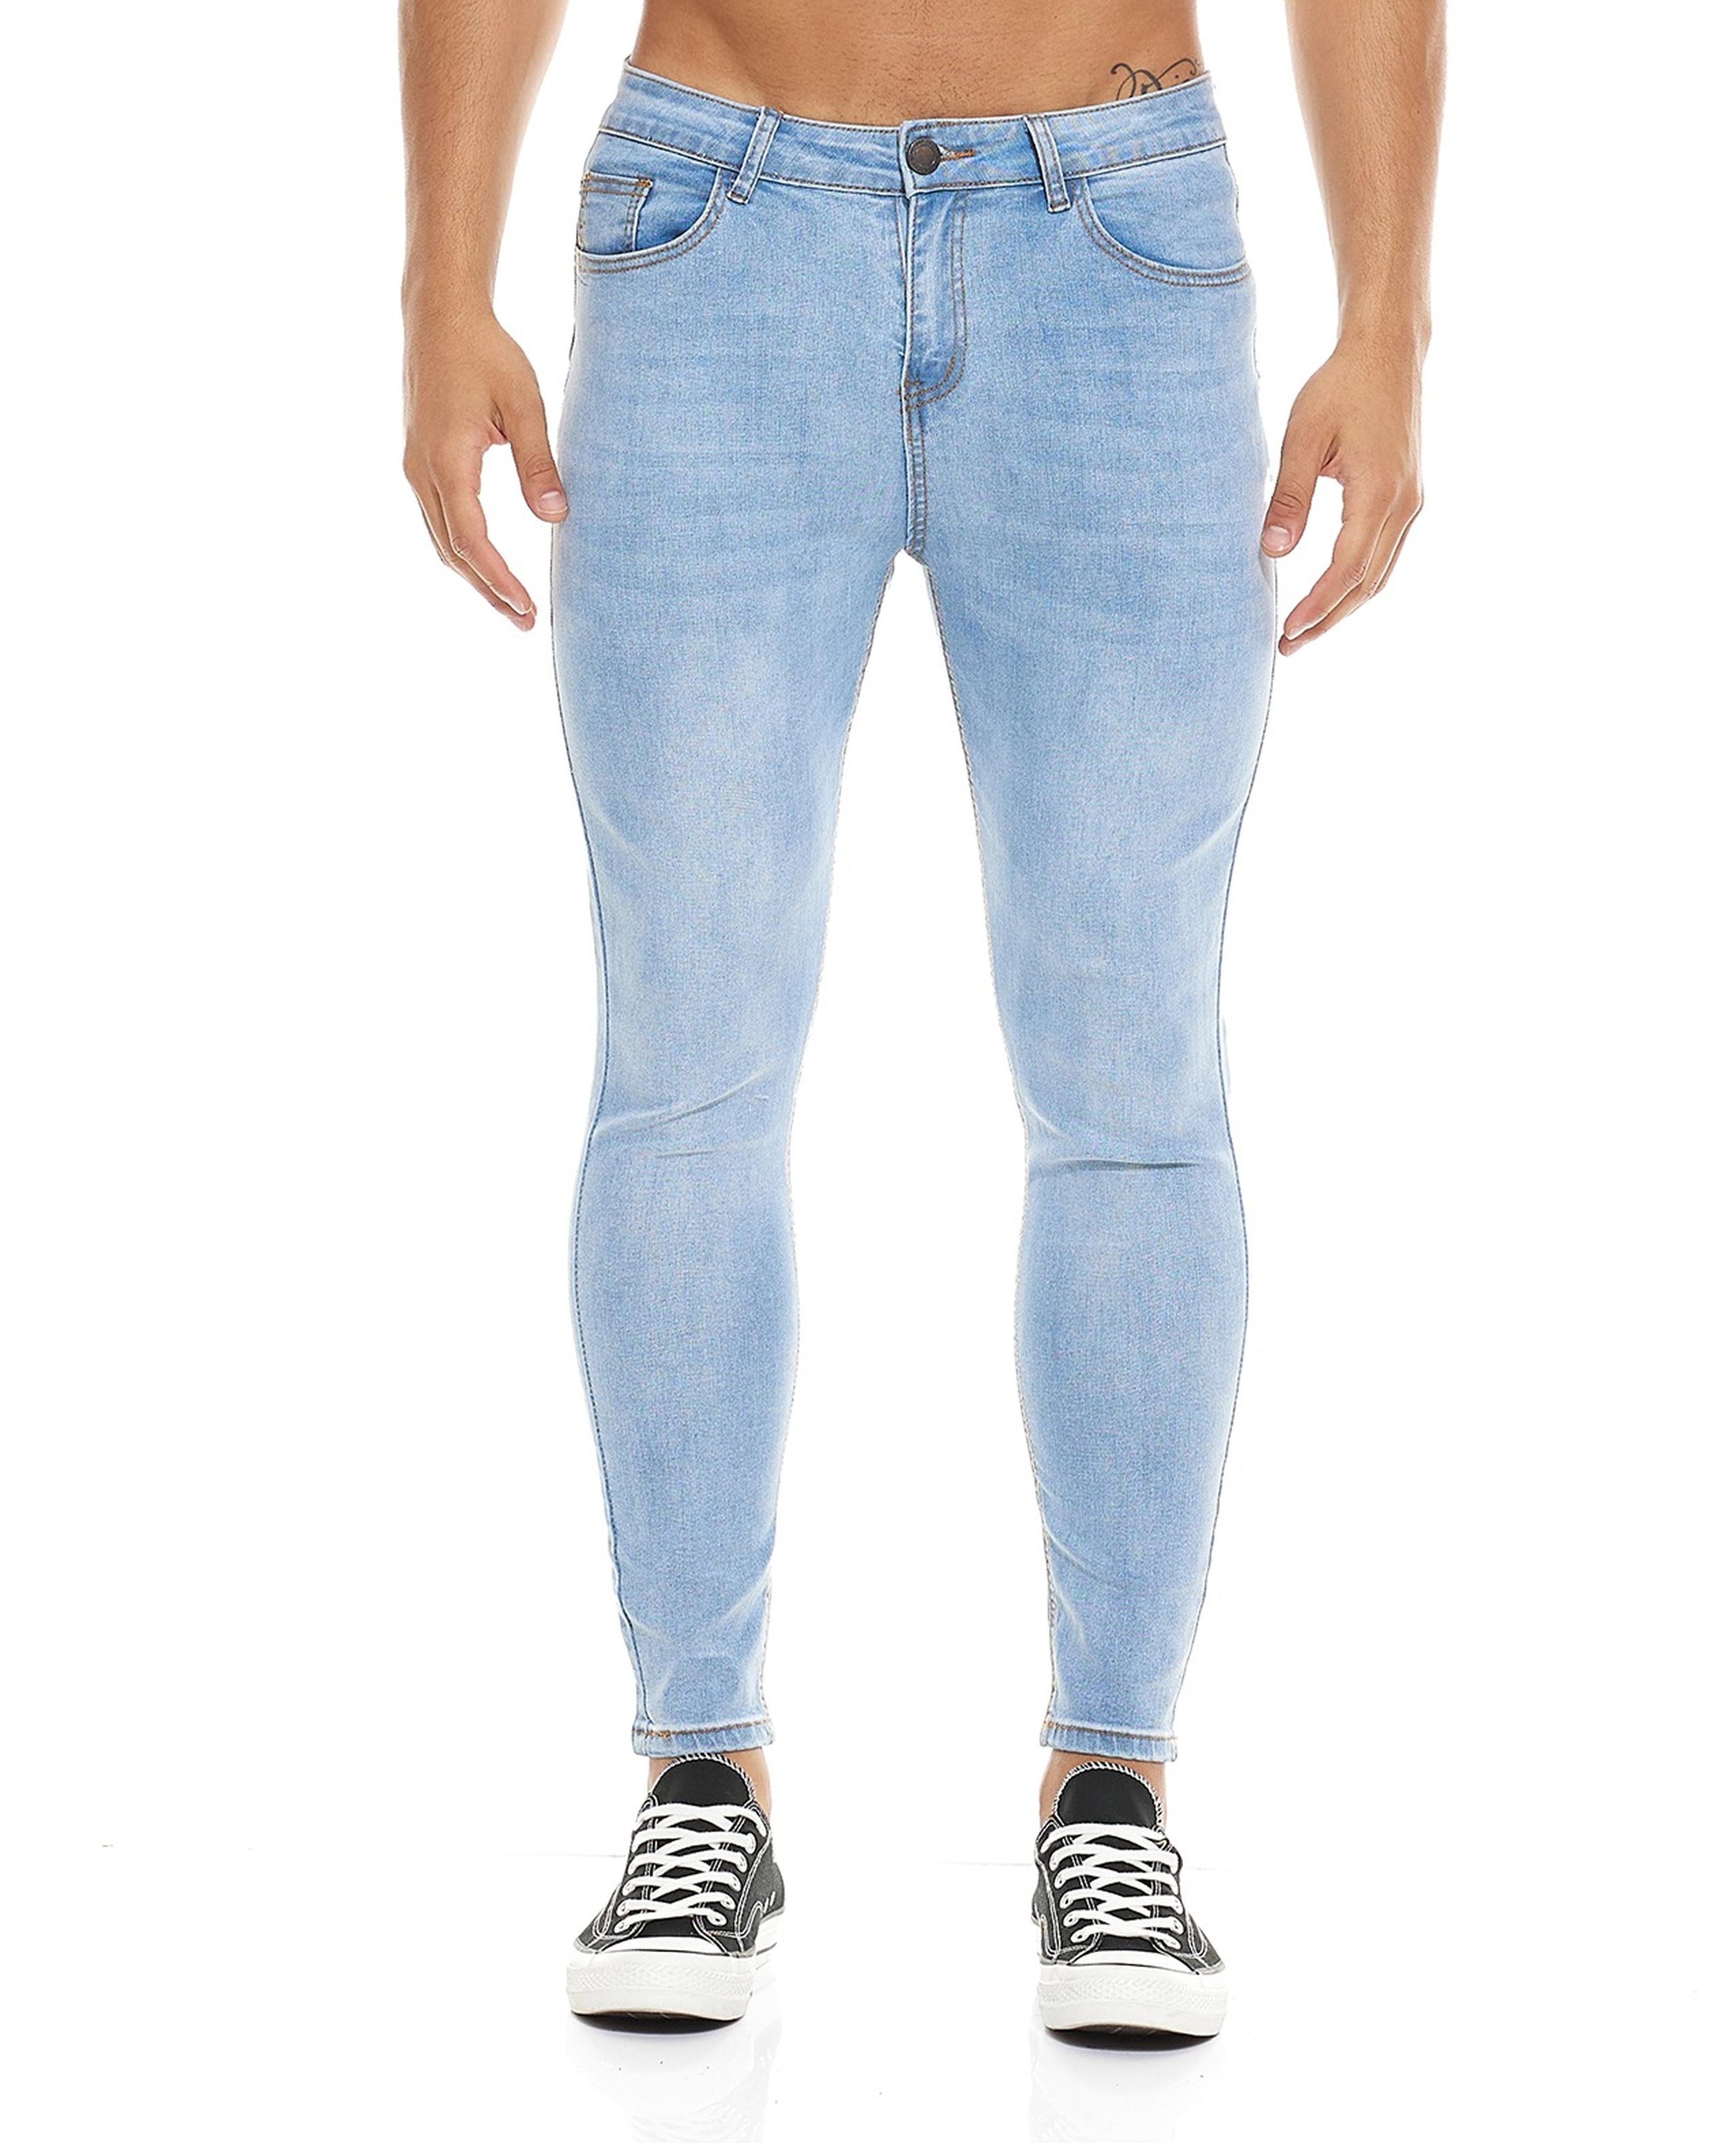 Faded Skinny Jeans with Button Closure